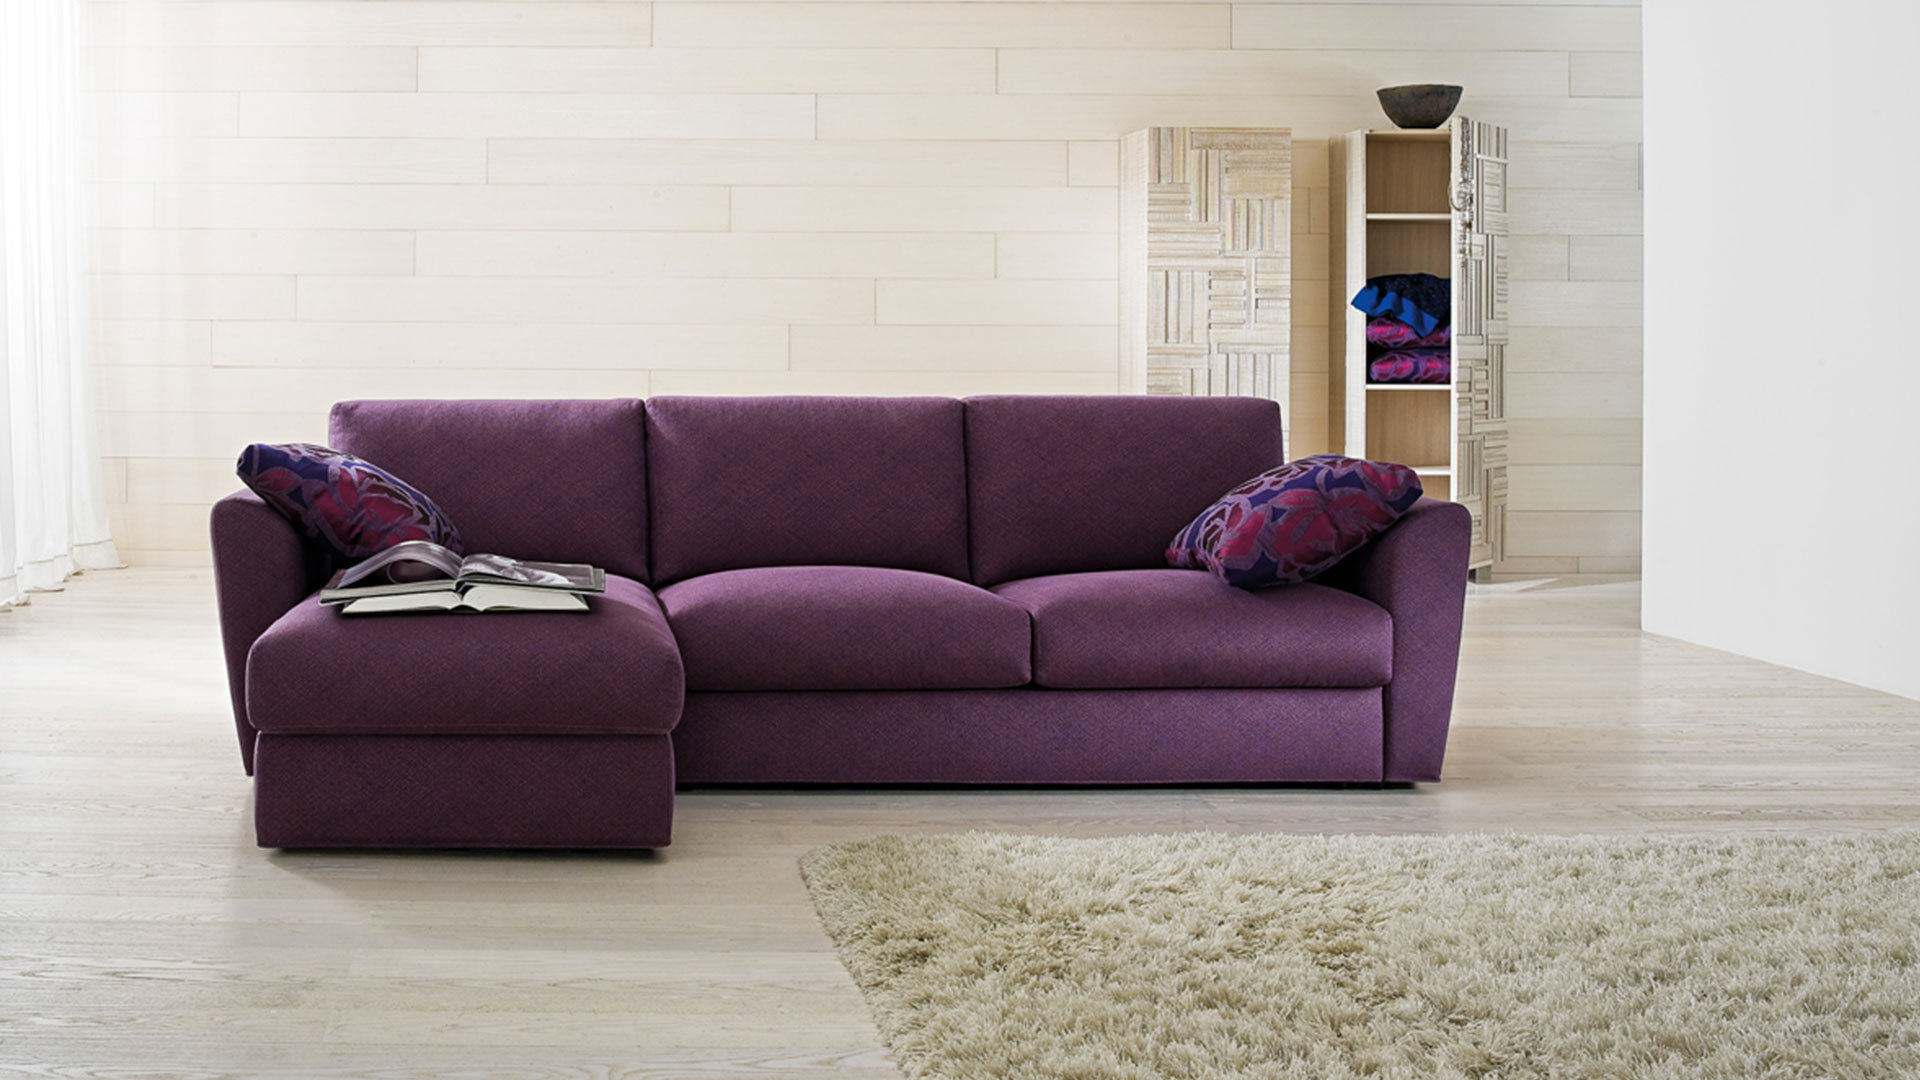 Blog IDW - 8 sofas for the whole family